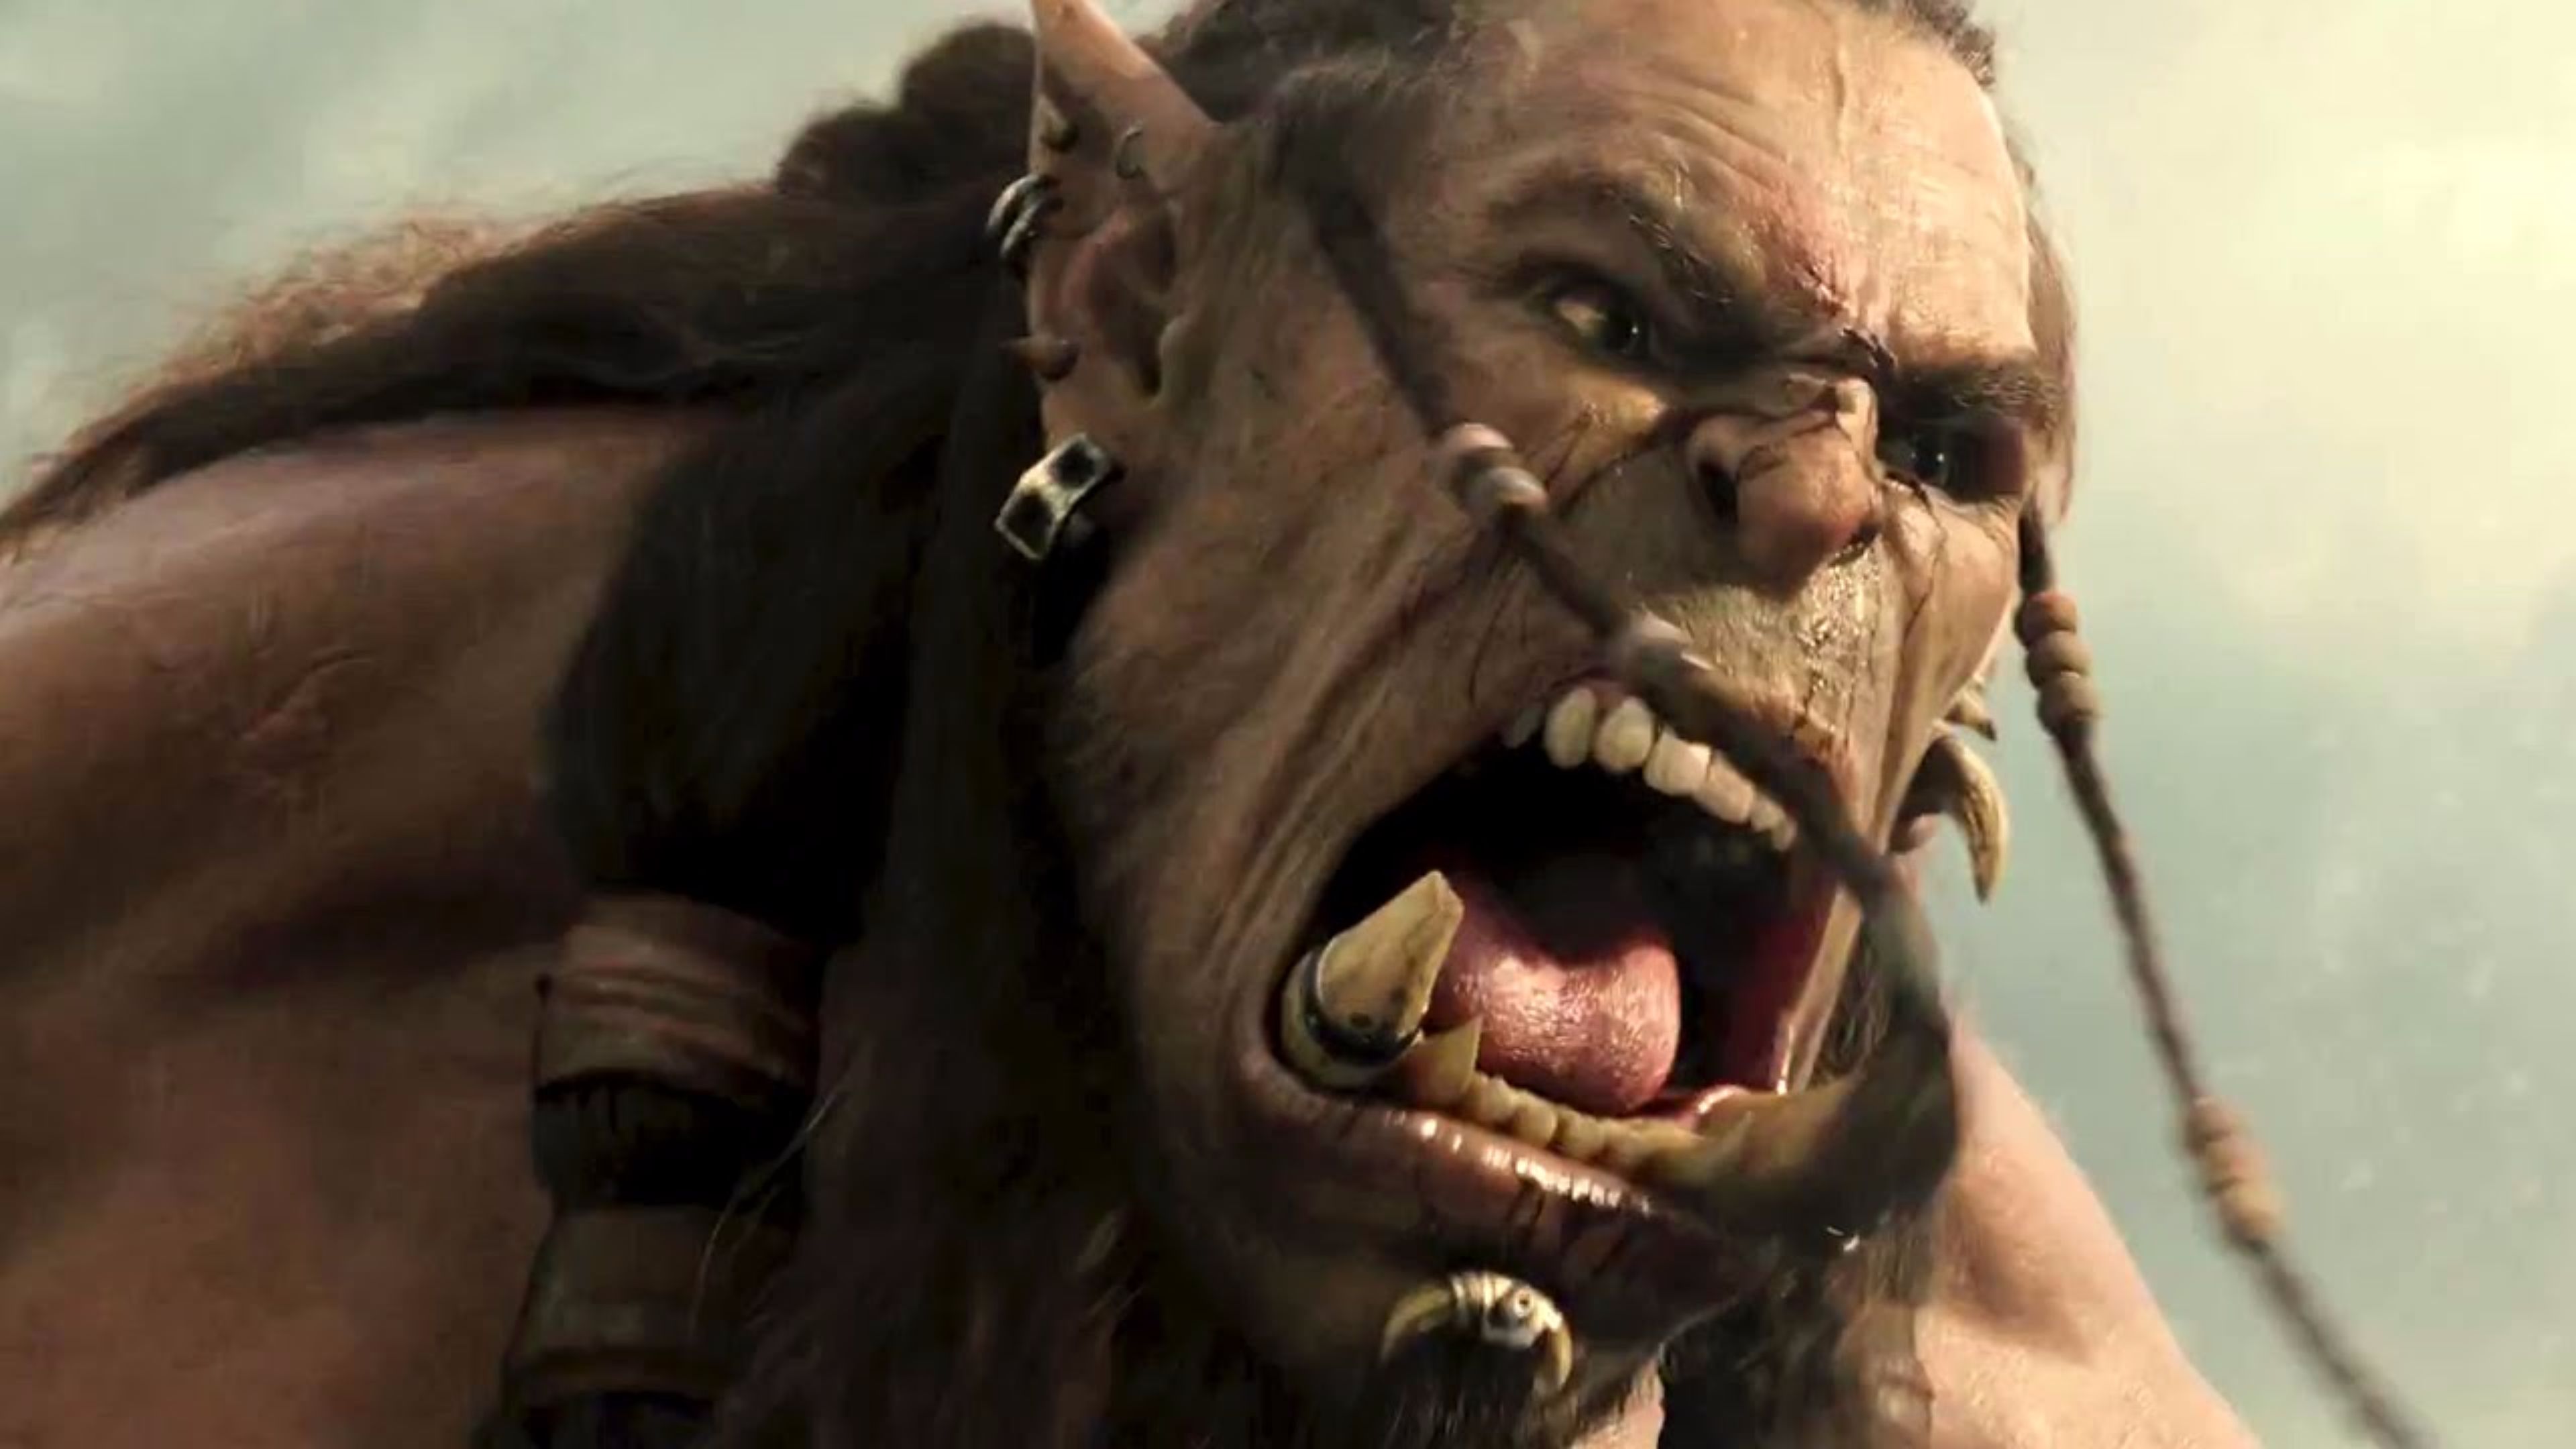 warcraft movie wallpaper,facial expression,tooth,snout,mouth,human